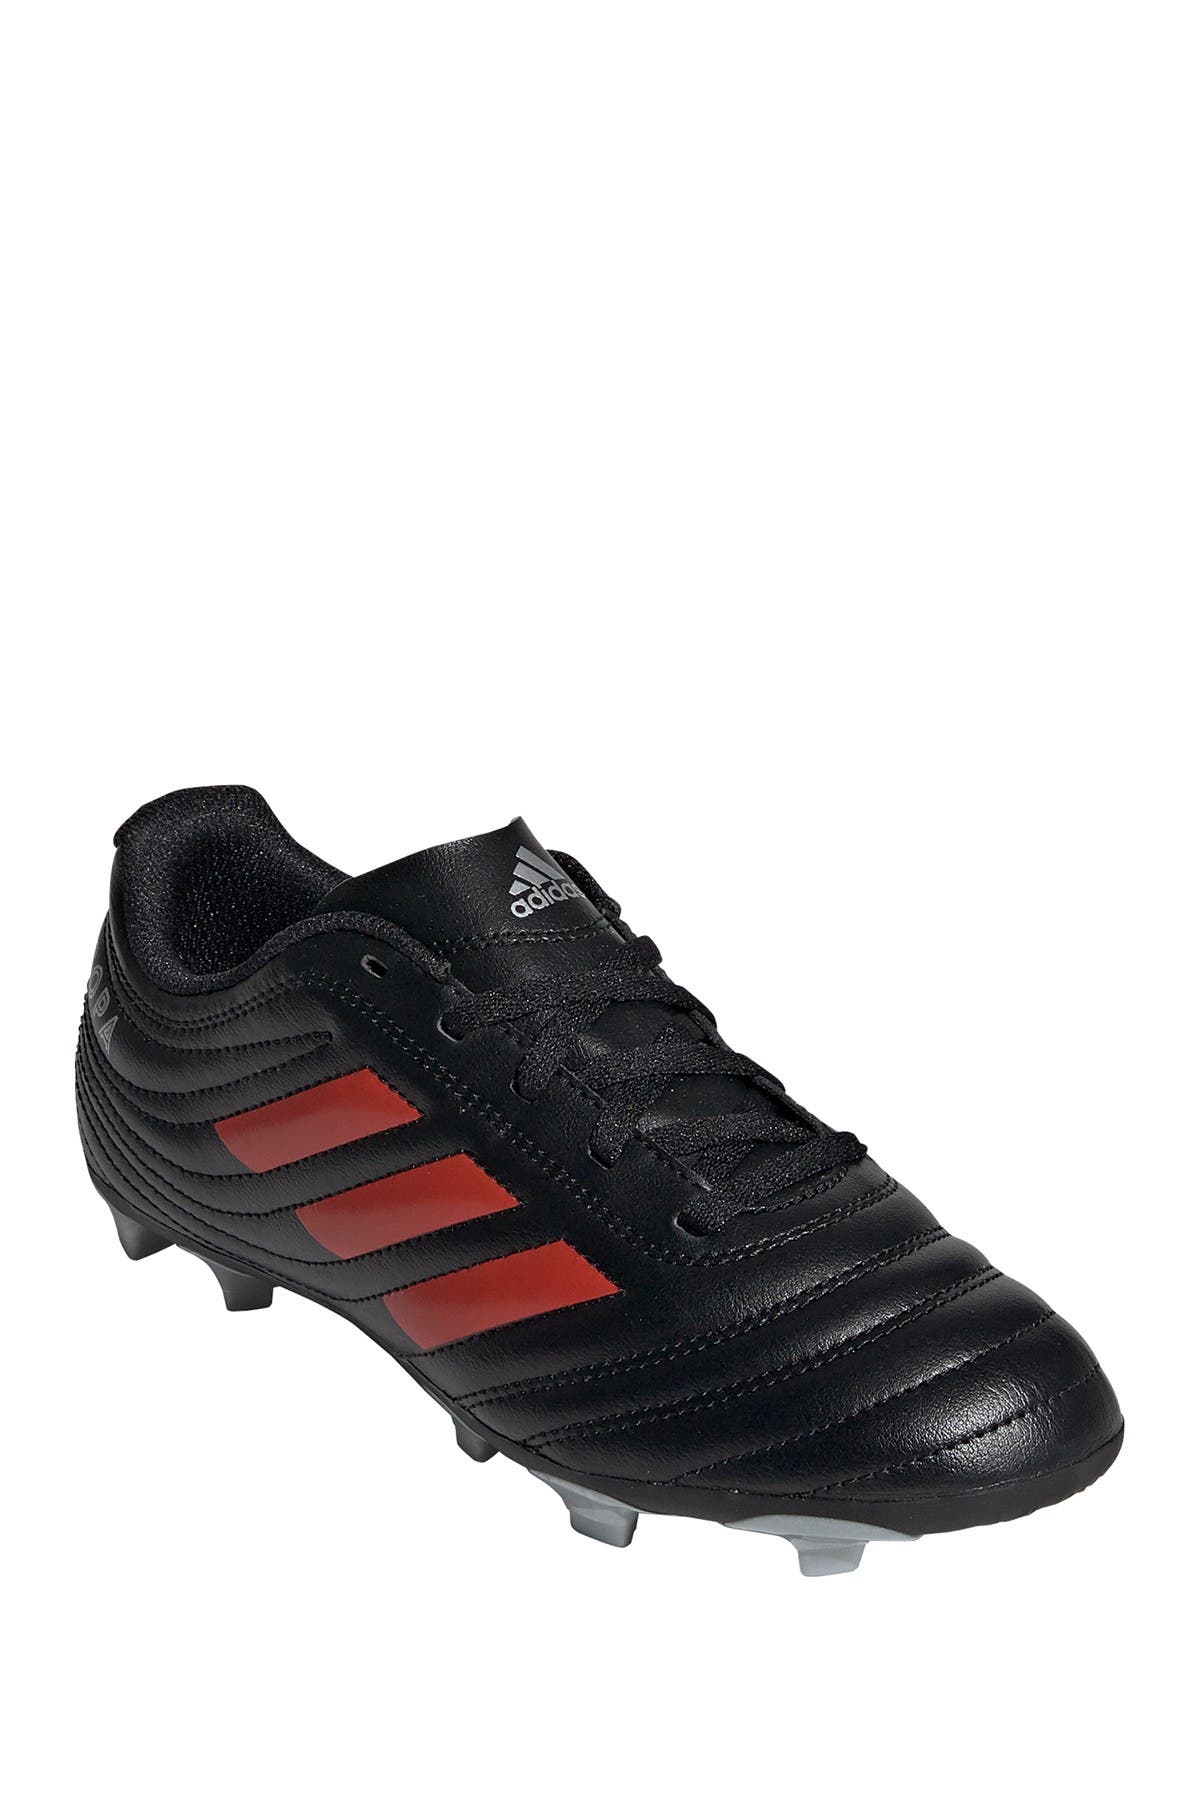 copa 7 year firm ground cleats